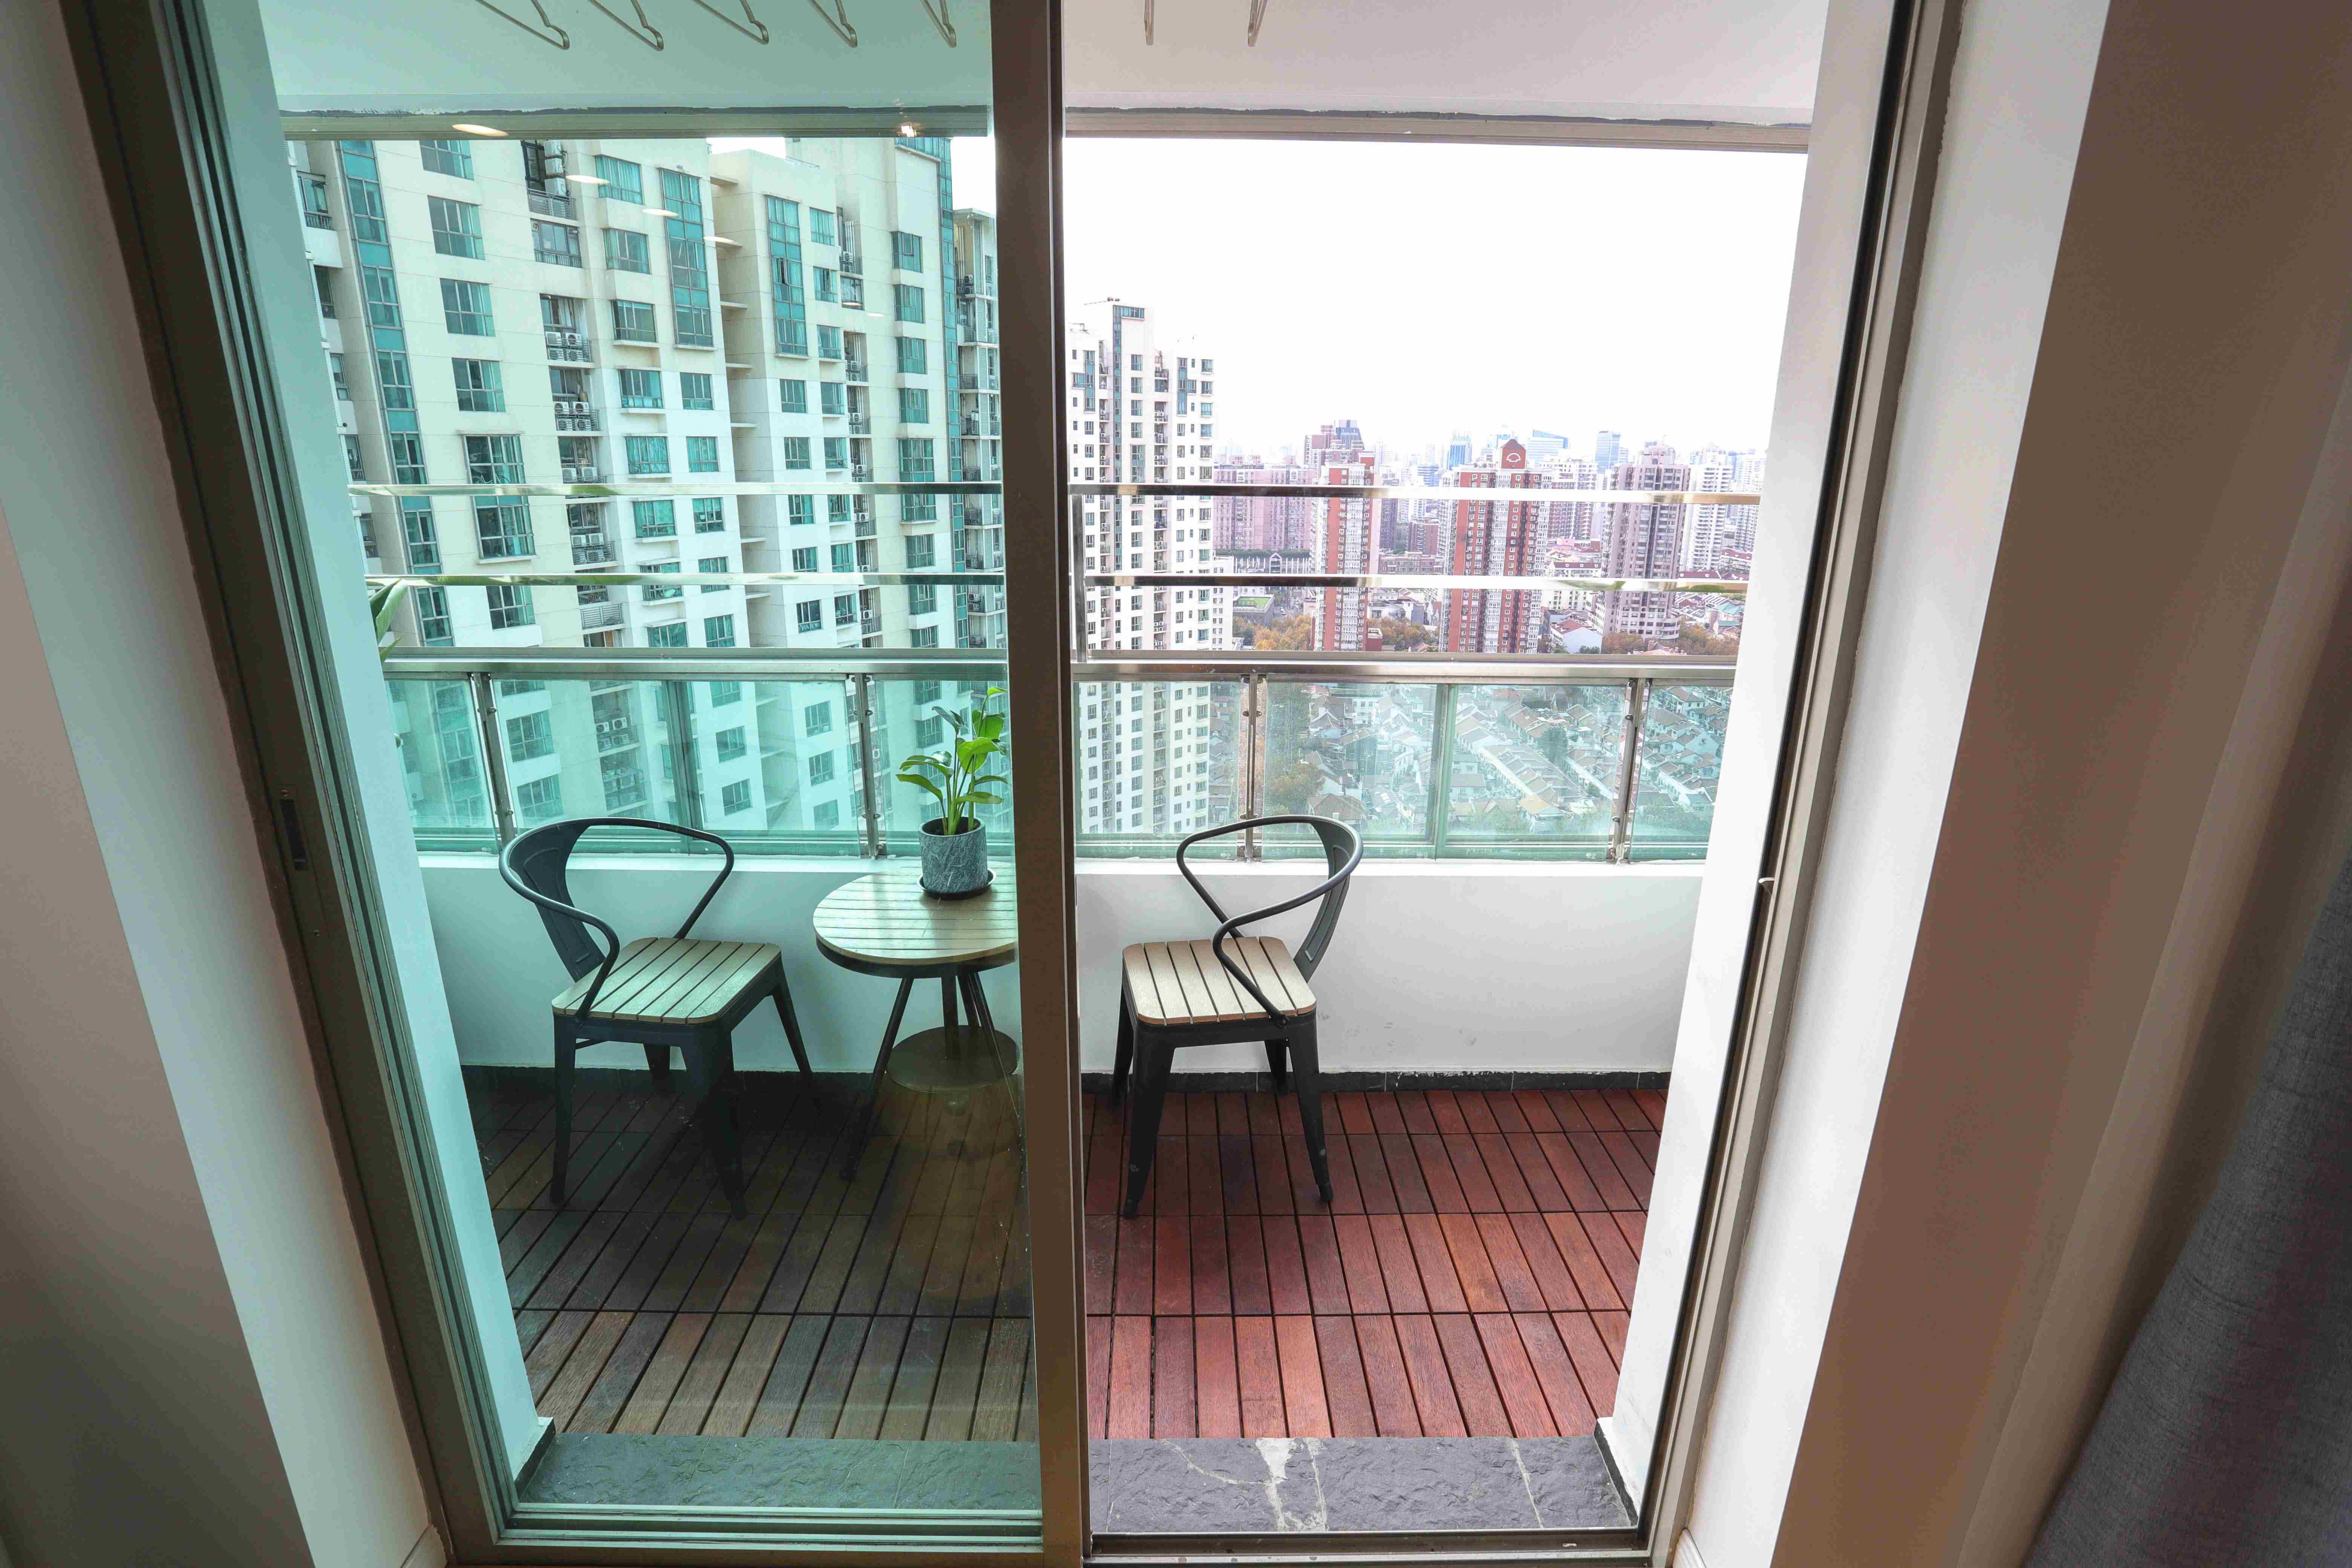 big balcony New Modern Bright Spacious 2BR One Park Ave Apt for Rent in Shanghai Jing’an Near LN 2/7